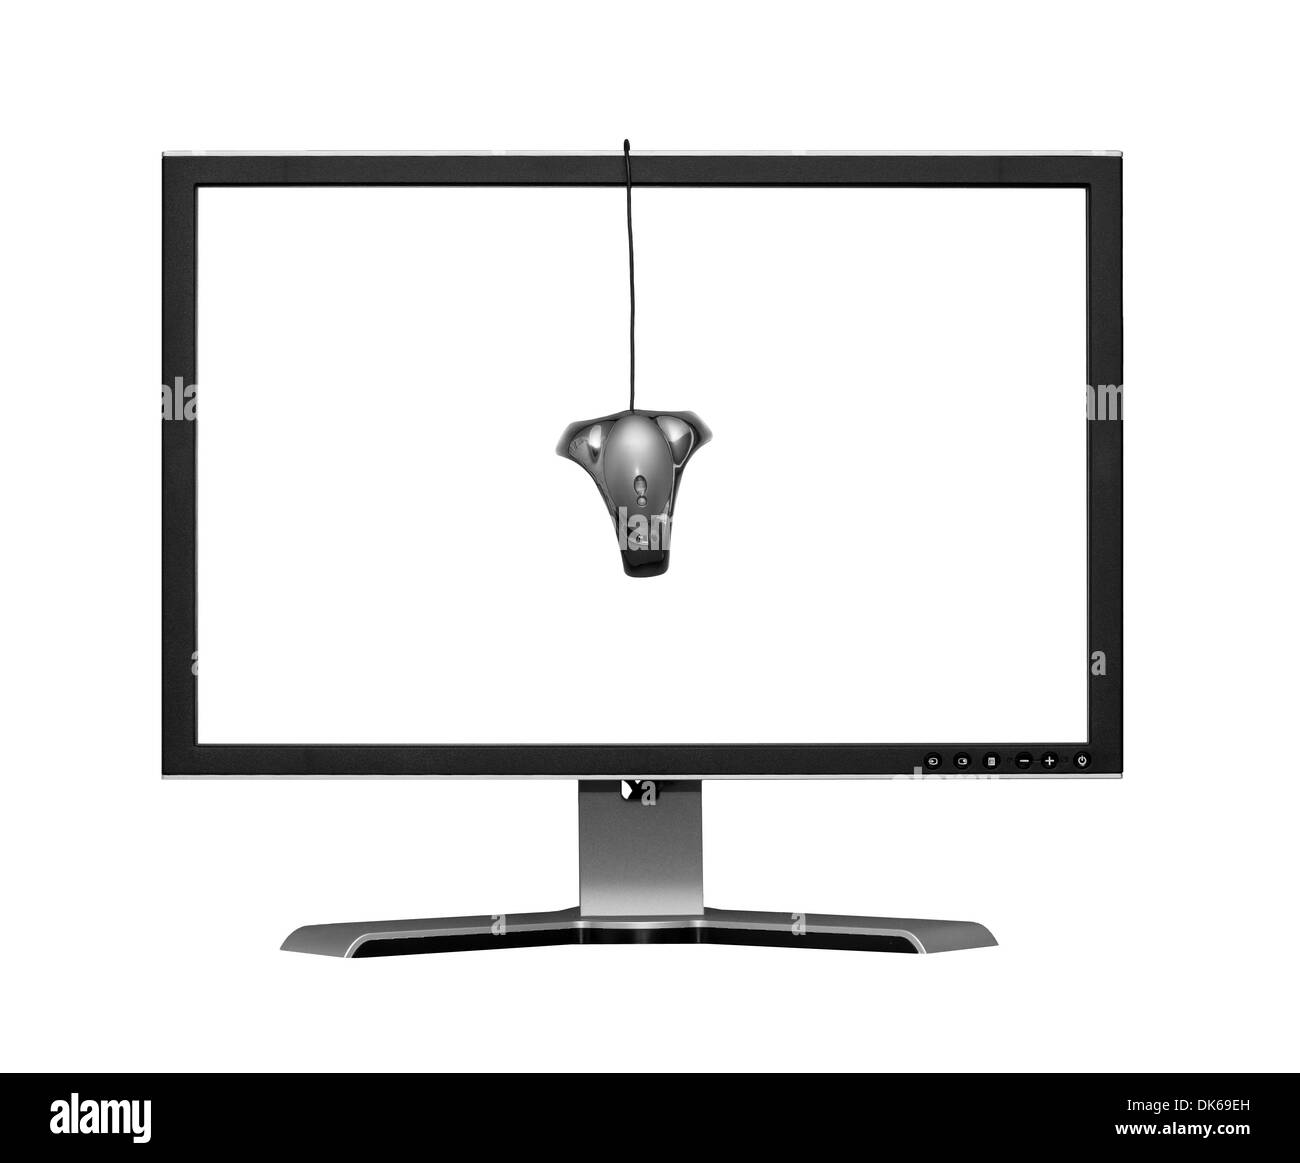 Screen calibration Black and White Stock Photos & Images - Alamy